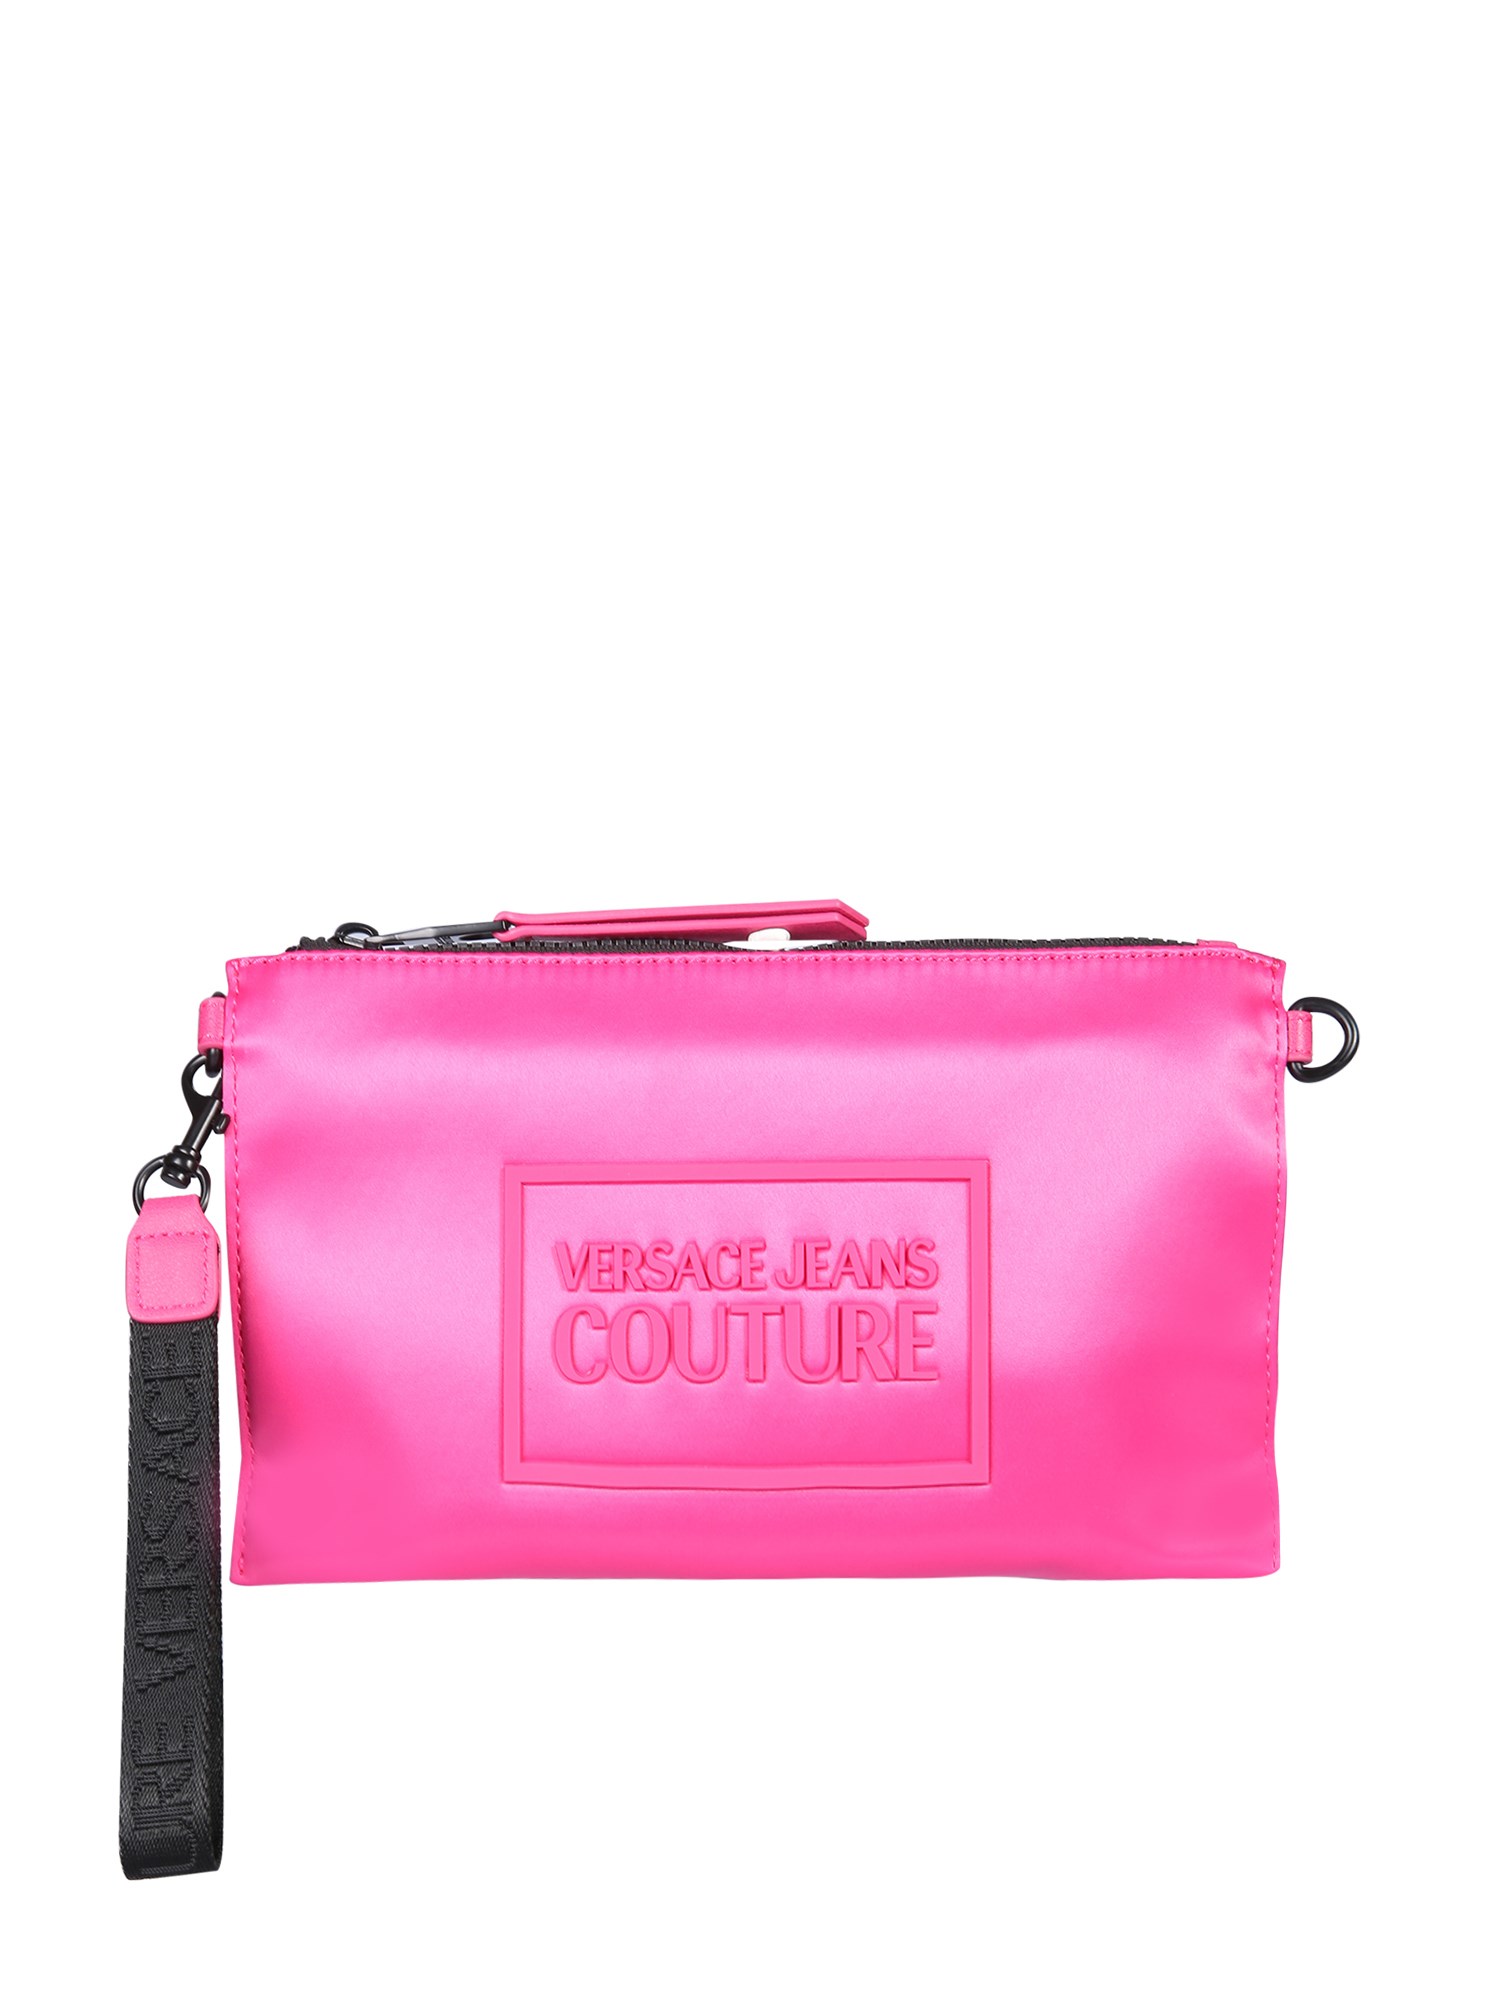 VERSACE JEANS COUTURE Bags | ModeSens